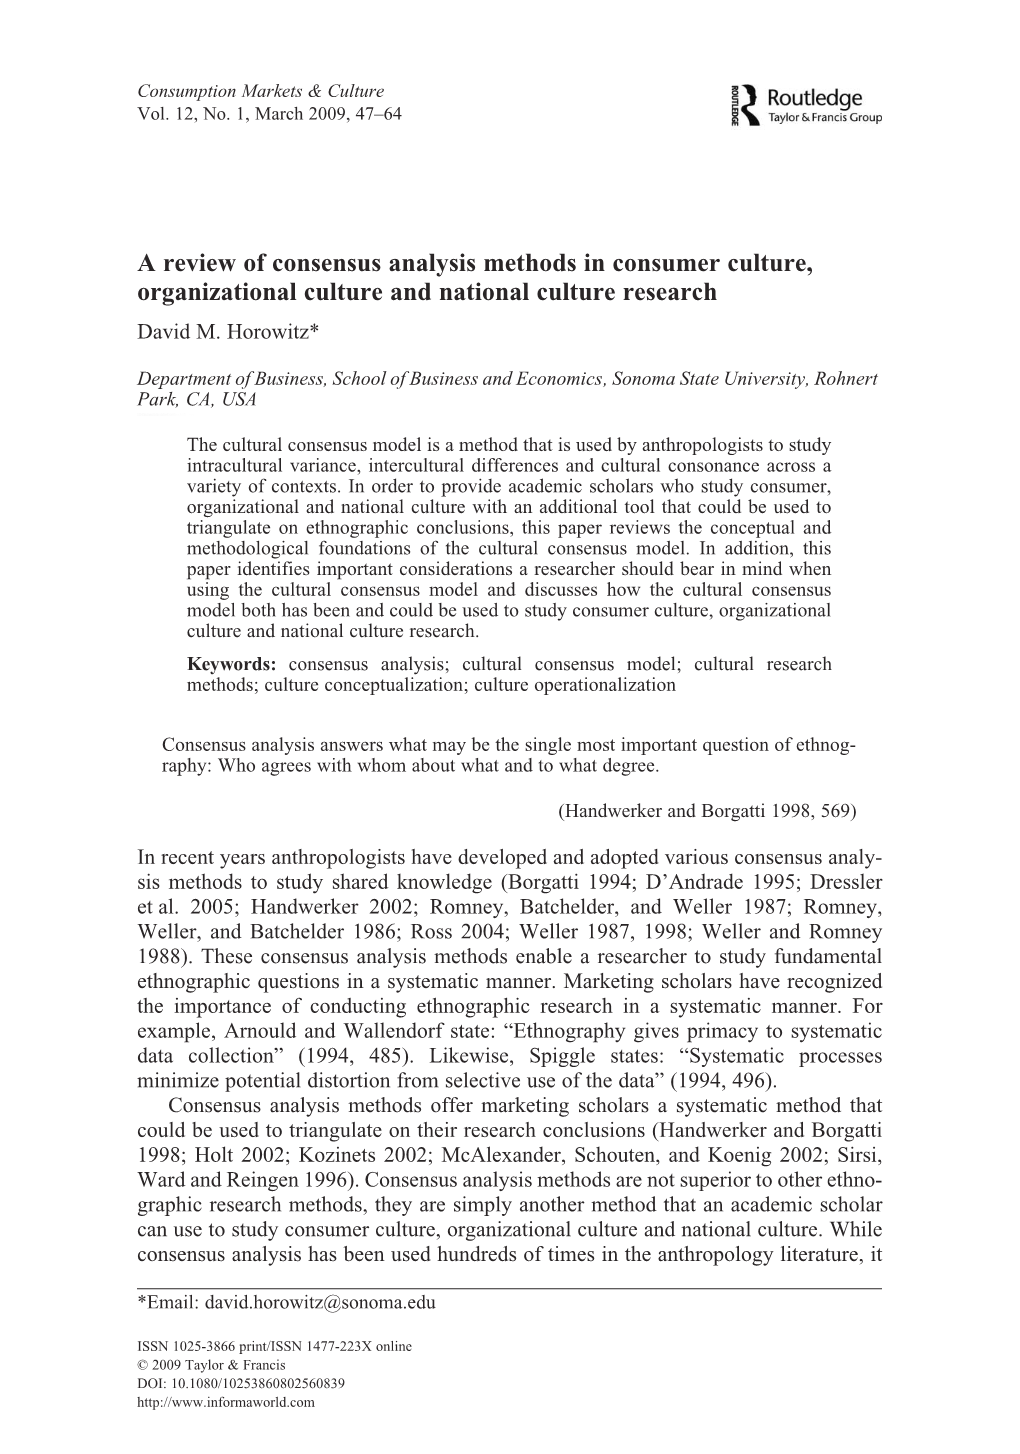 A Review of Consensus Analysis Methods in Consumer Culture, Organizational Culture and National Culture Research David M